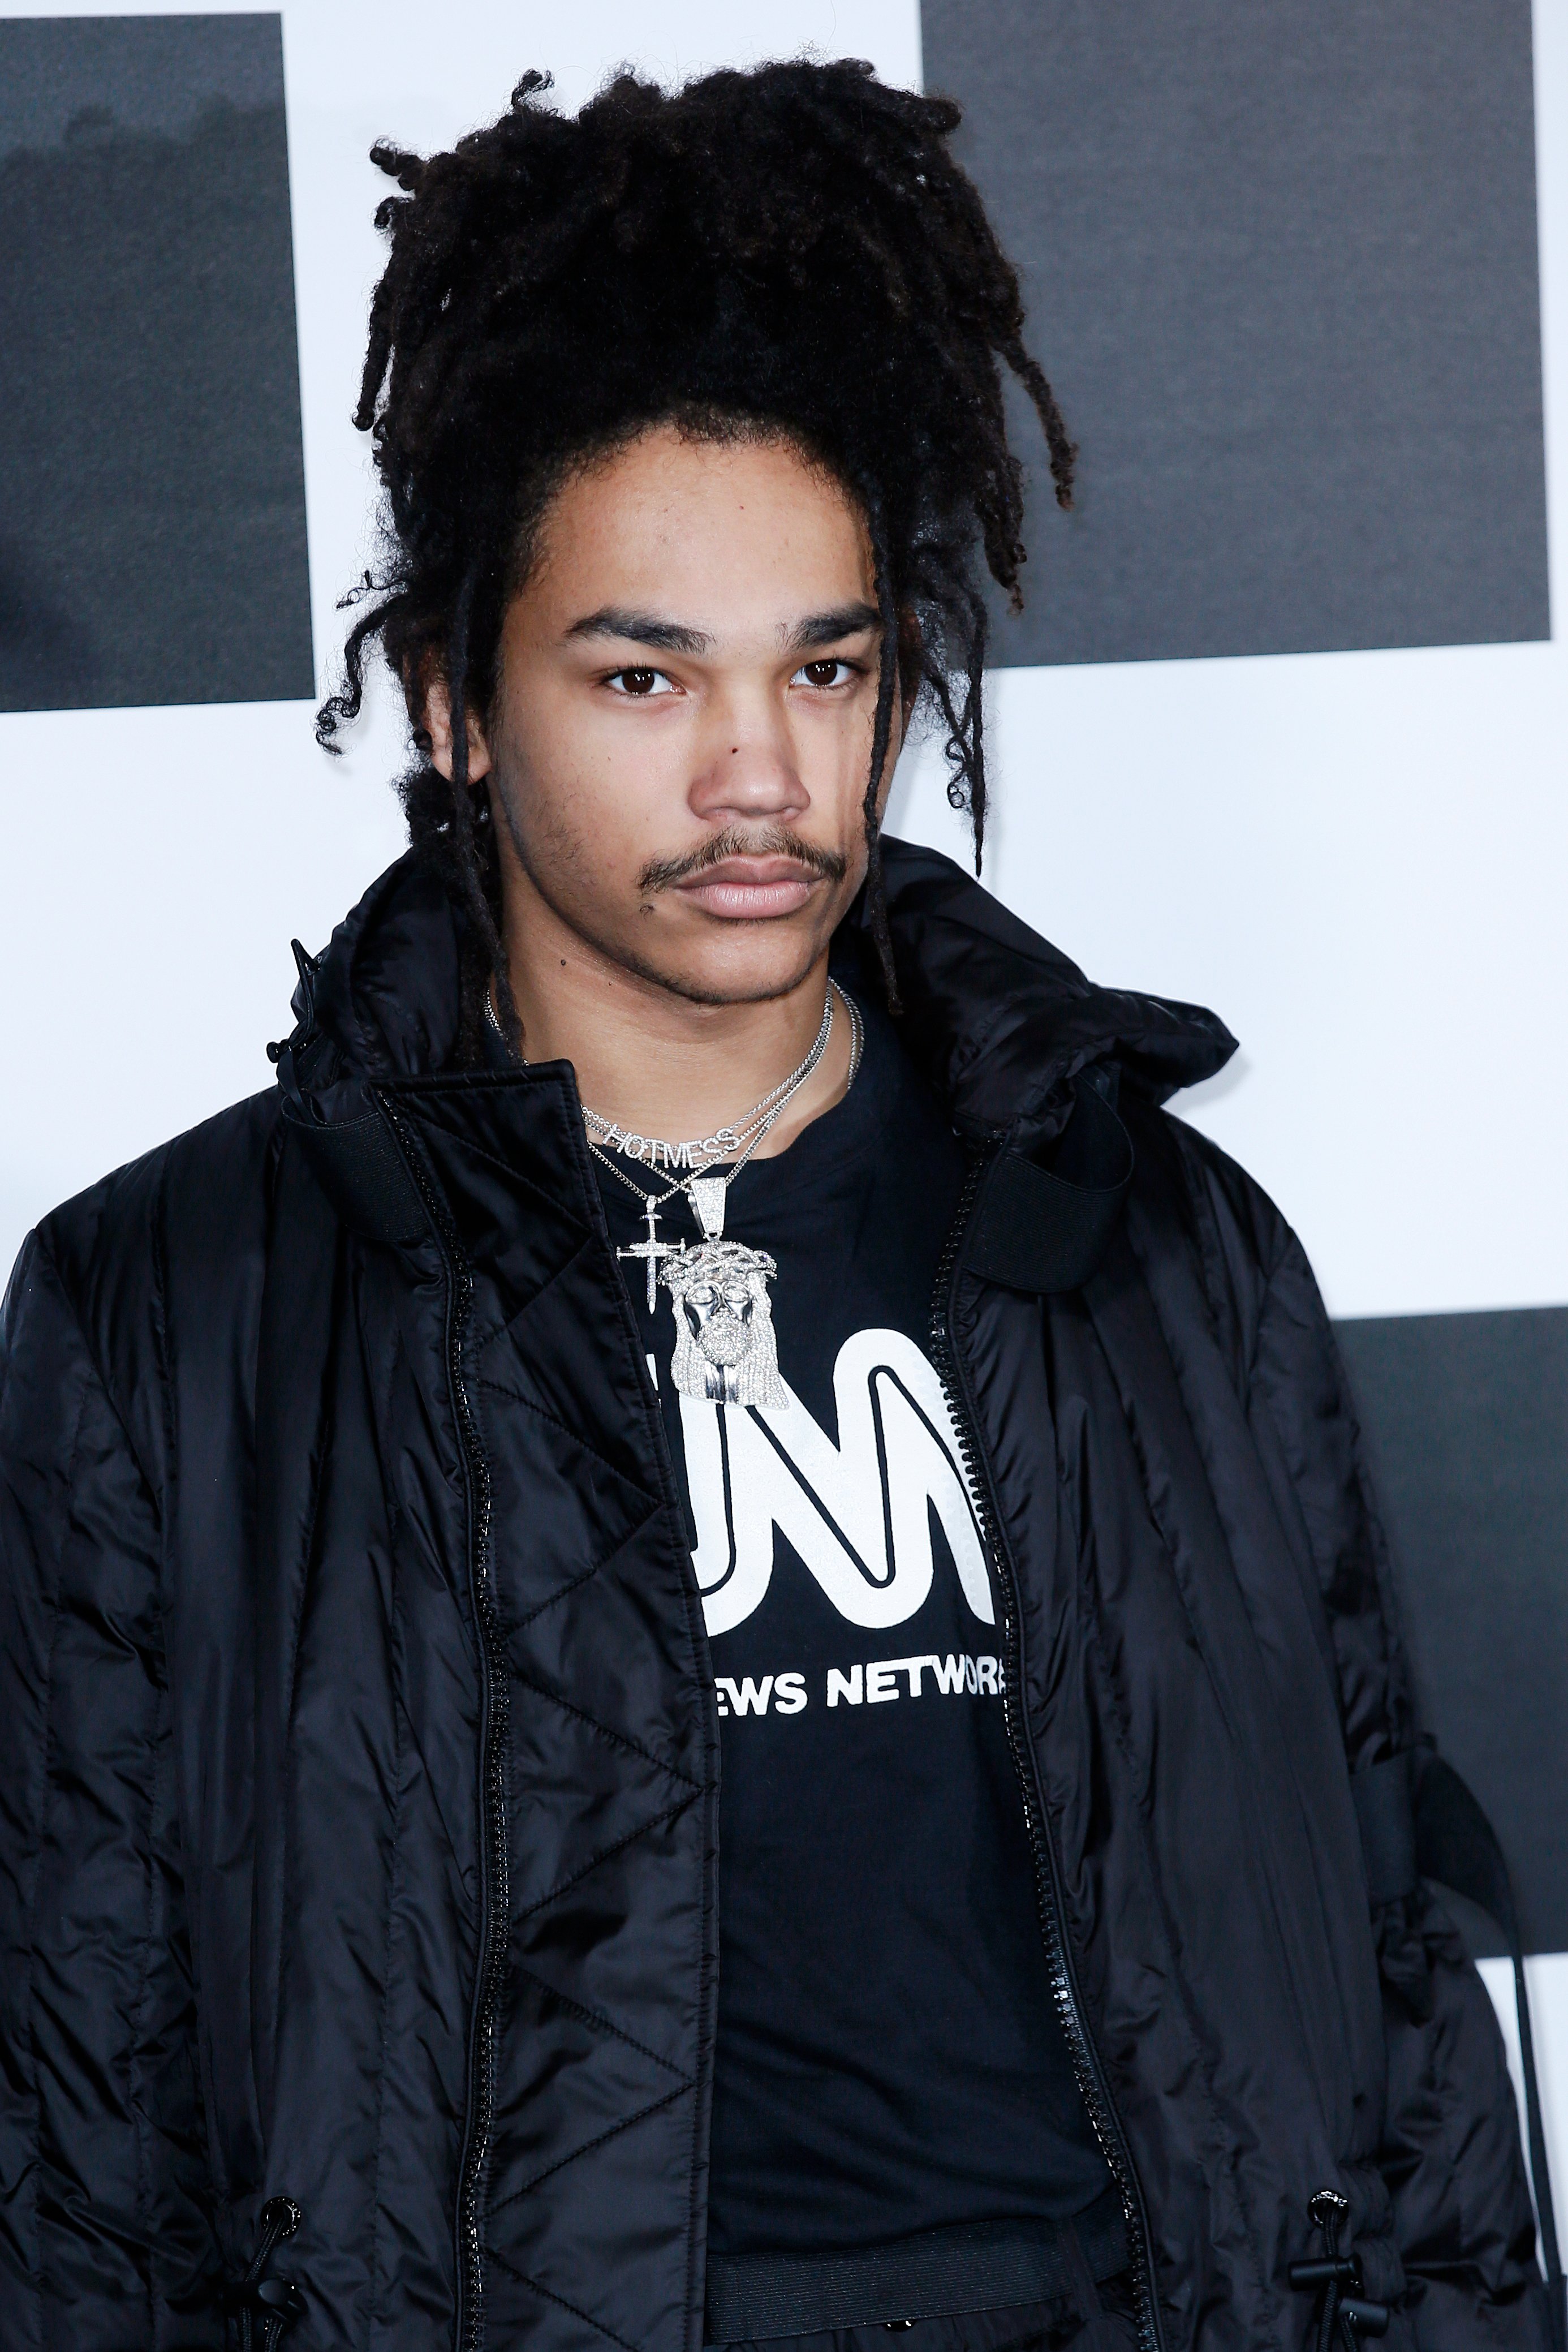 Model Luka Sabbat attends the Moncler Genius event during Milan Fashion Week Winter 2018/19 on February 20, 2018 in Milan, Italy | Photo: Shutterstock